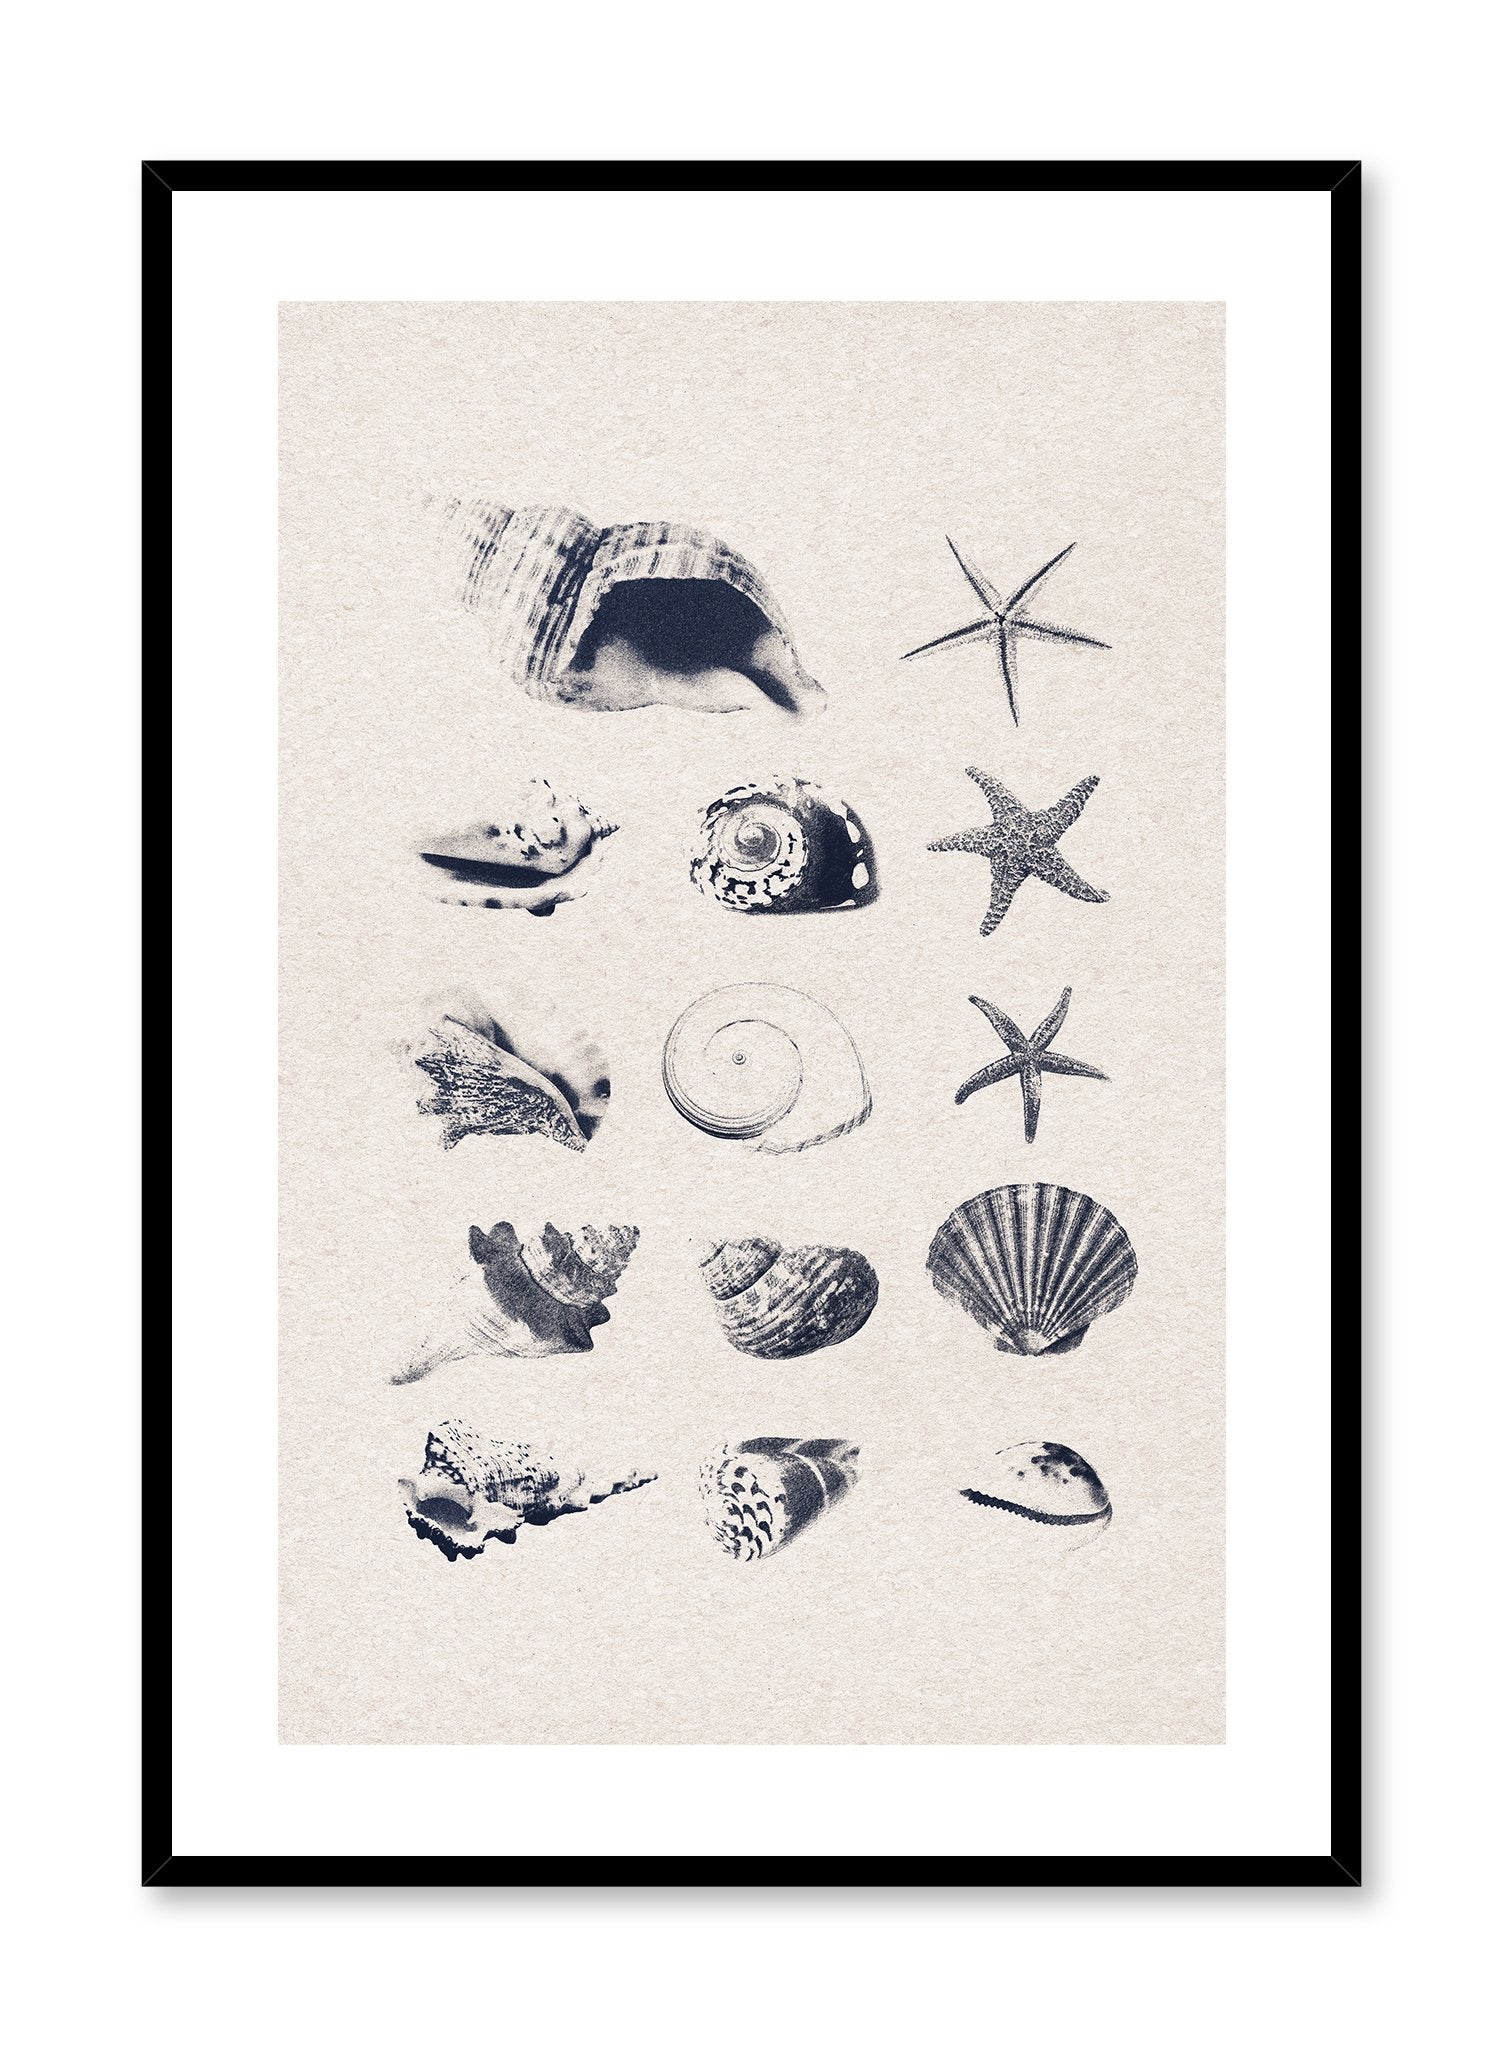 Coastal Treasures is a minimalist illustration of a collection of many and different types of seashells and starfishes by Opposite Wall.